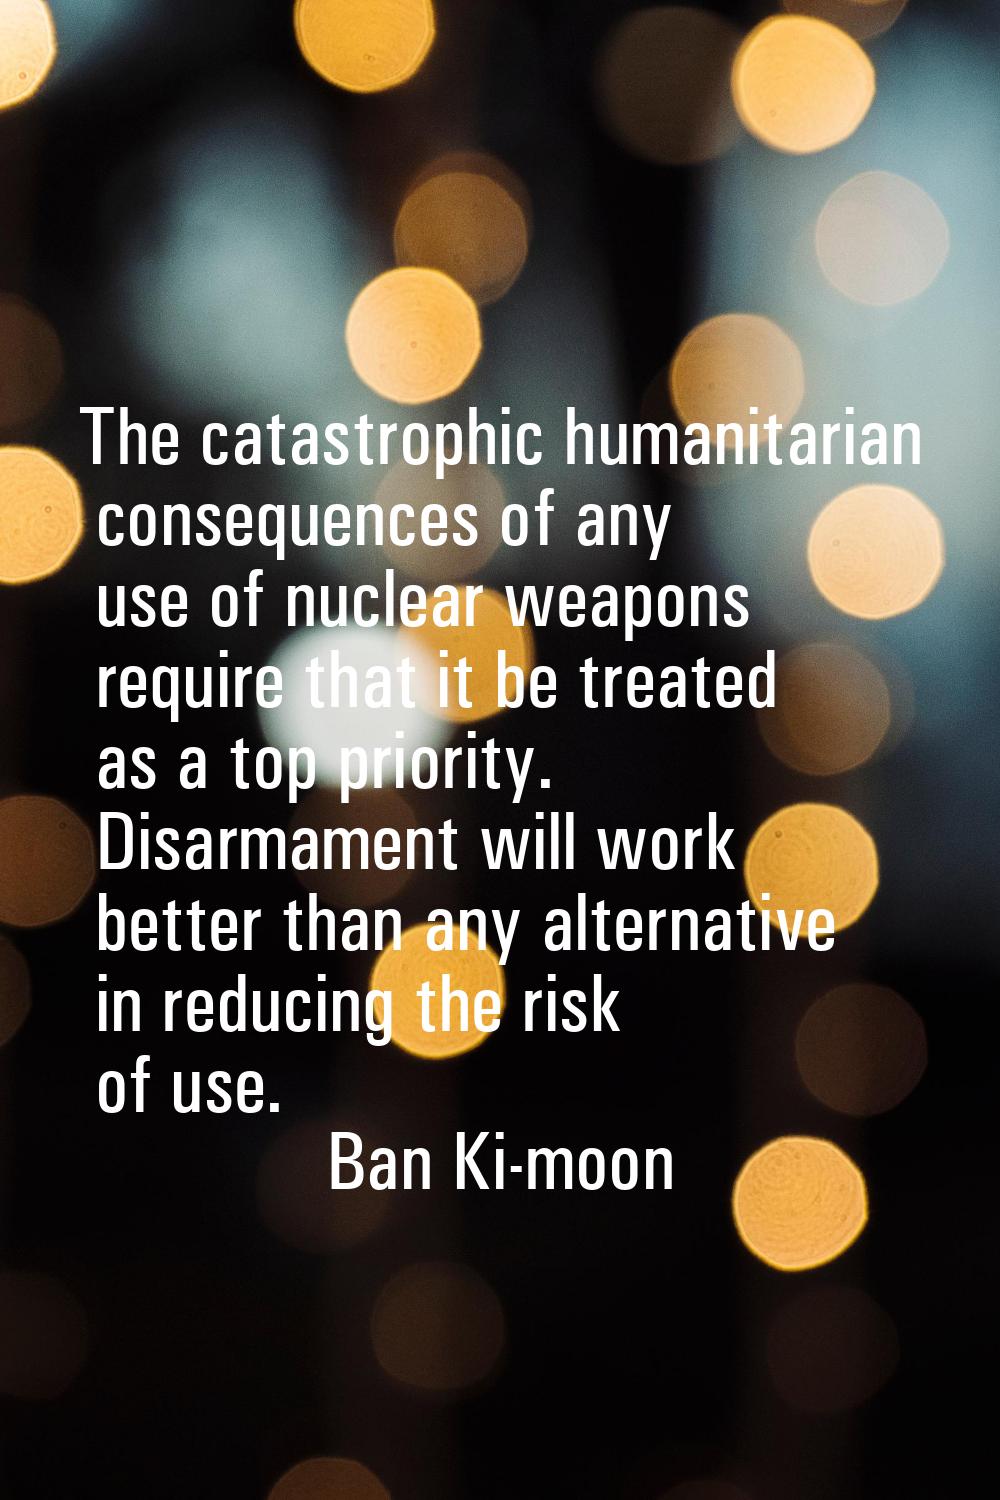 The catastrophic humanitarian consequences of any use of nuclear weapons require that it be treated